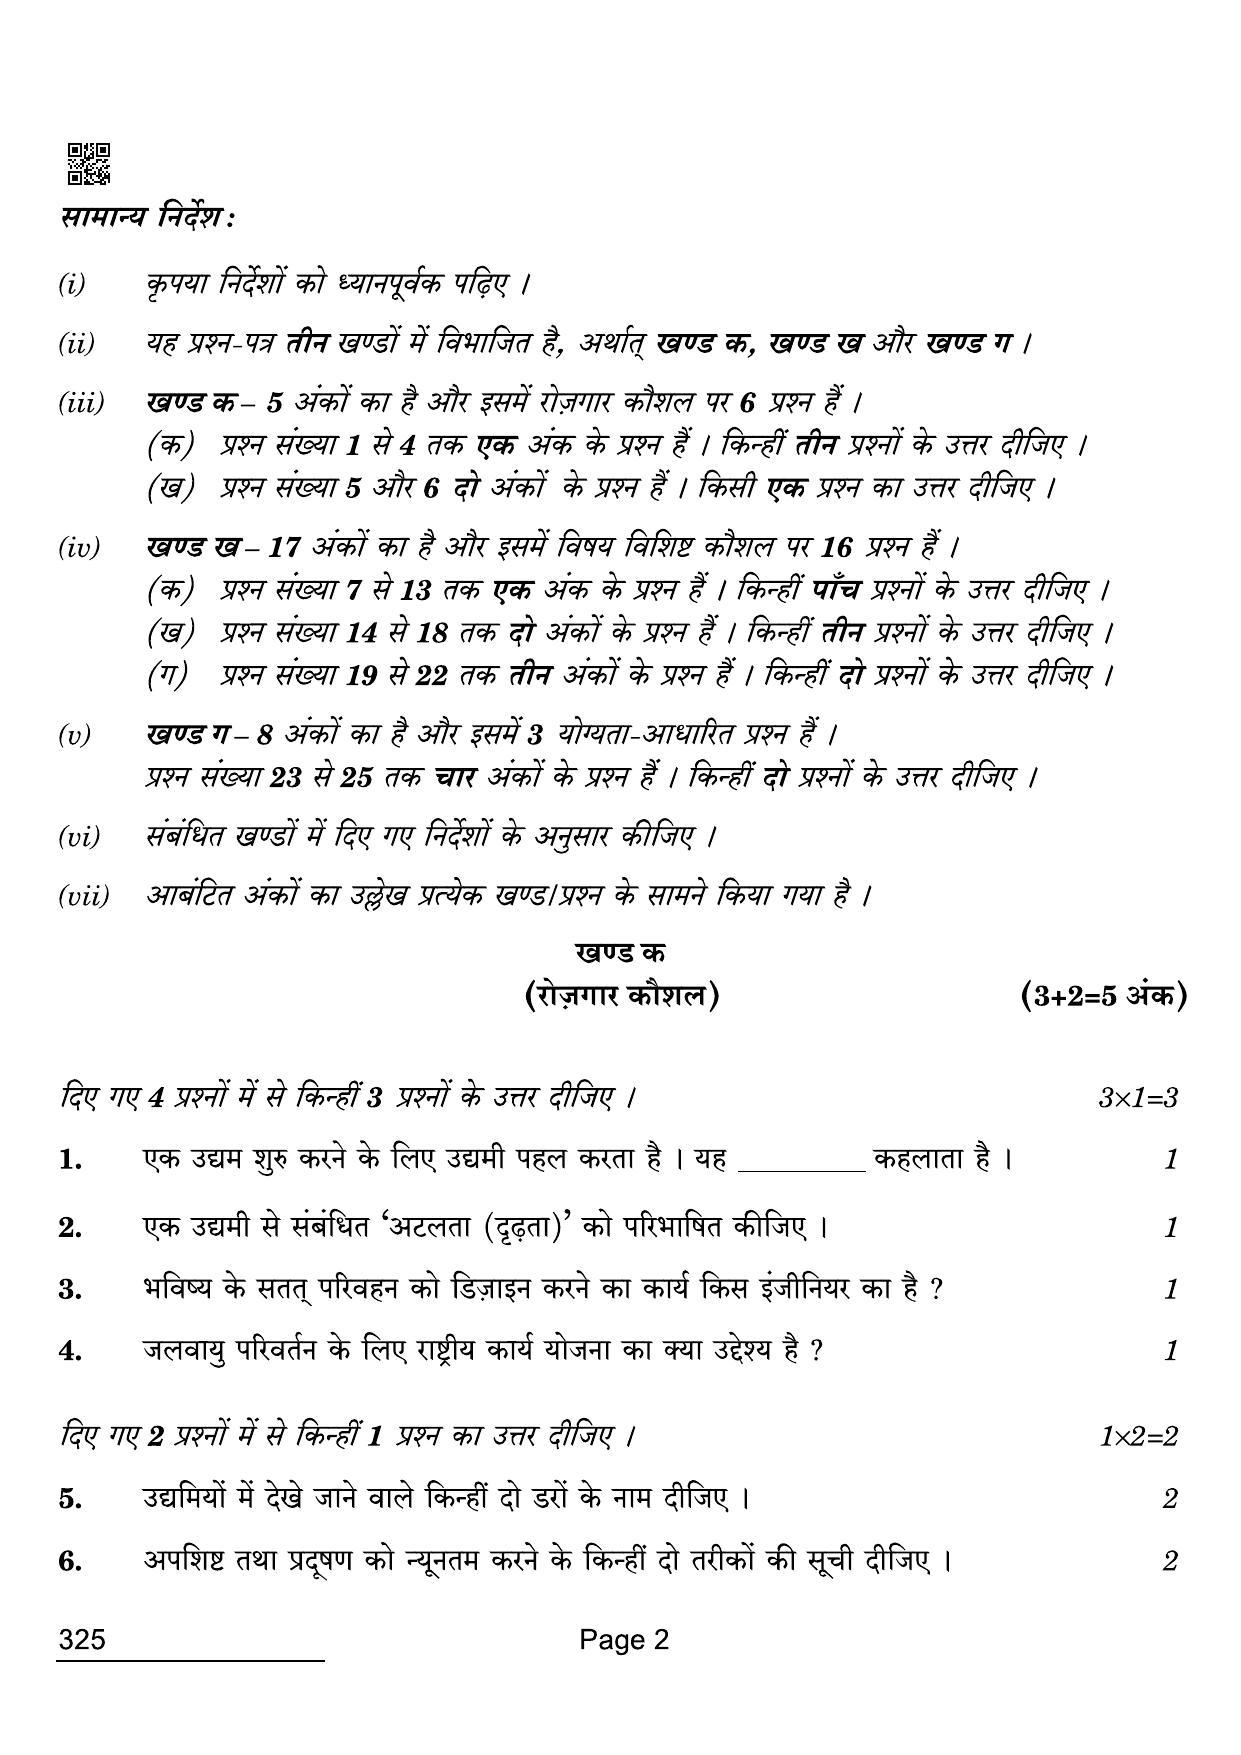 CBSE Class 12 325 Retail 2022 Compartment Question Paper - Page 2